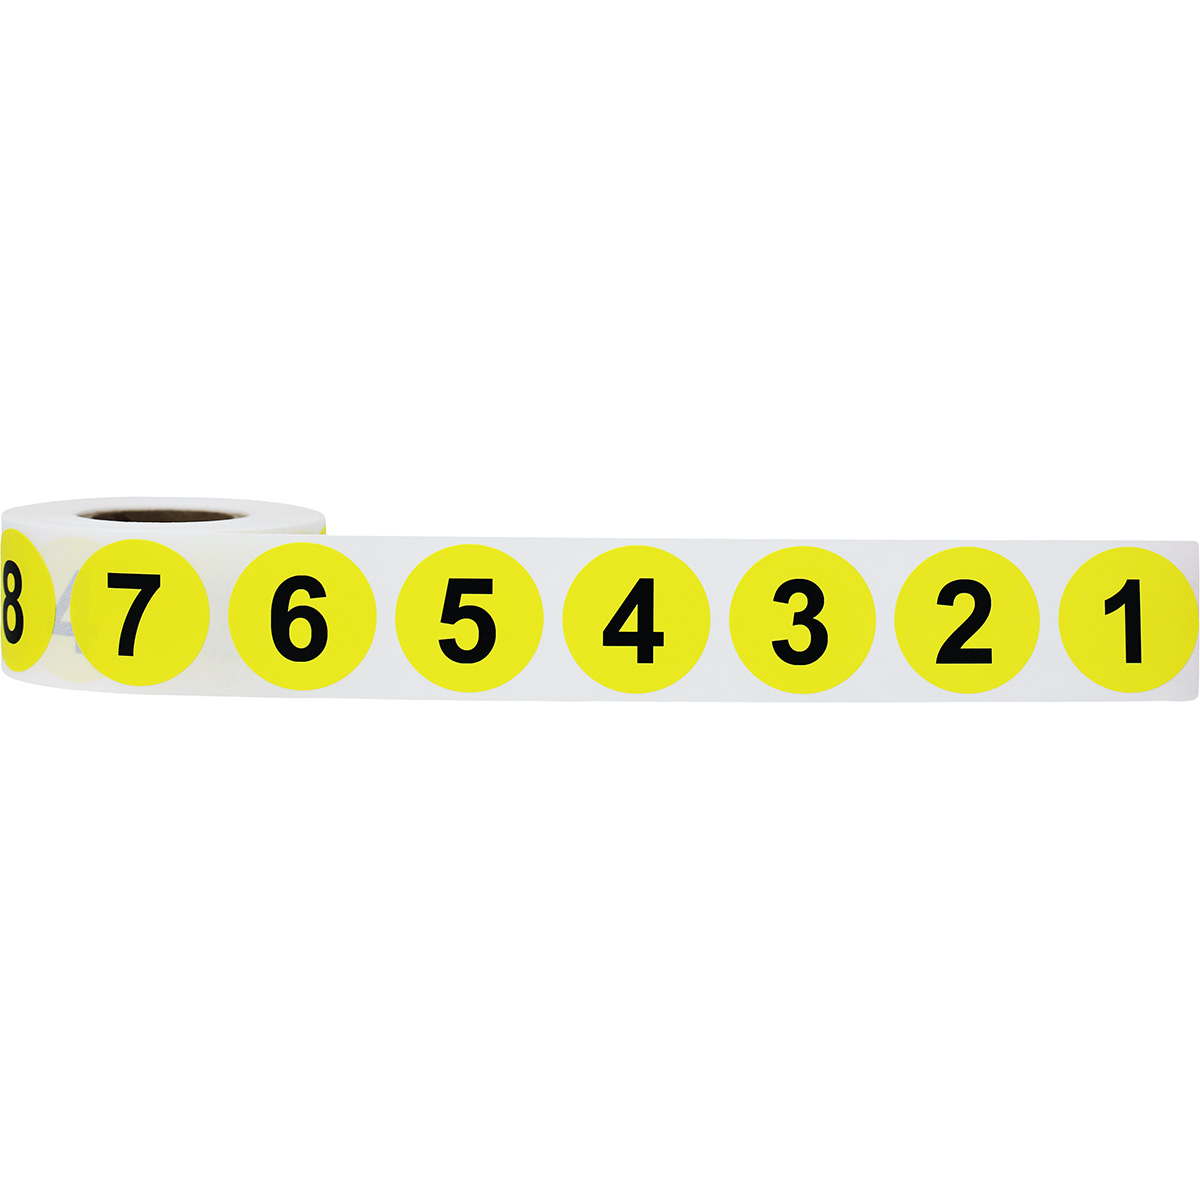 1-10 (50 times) Consecutive Number Labels 1 Round Yellow and